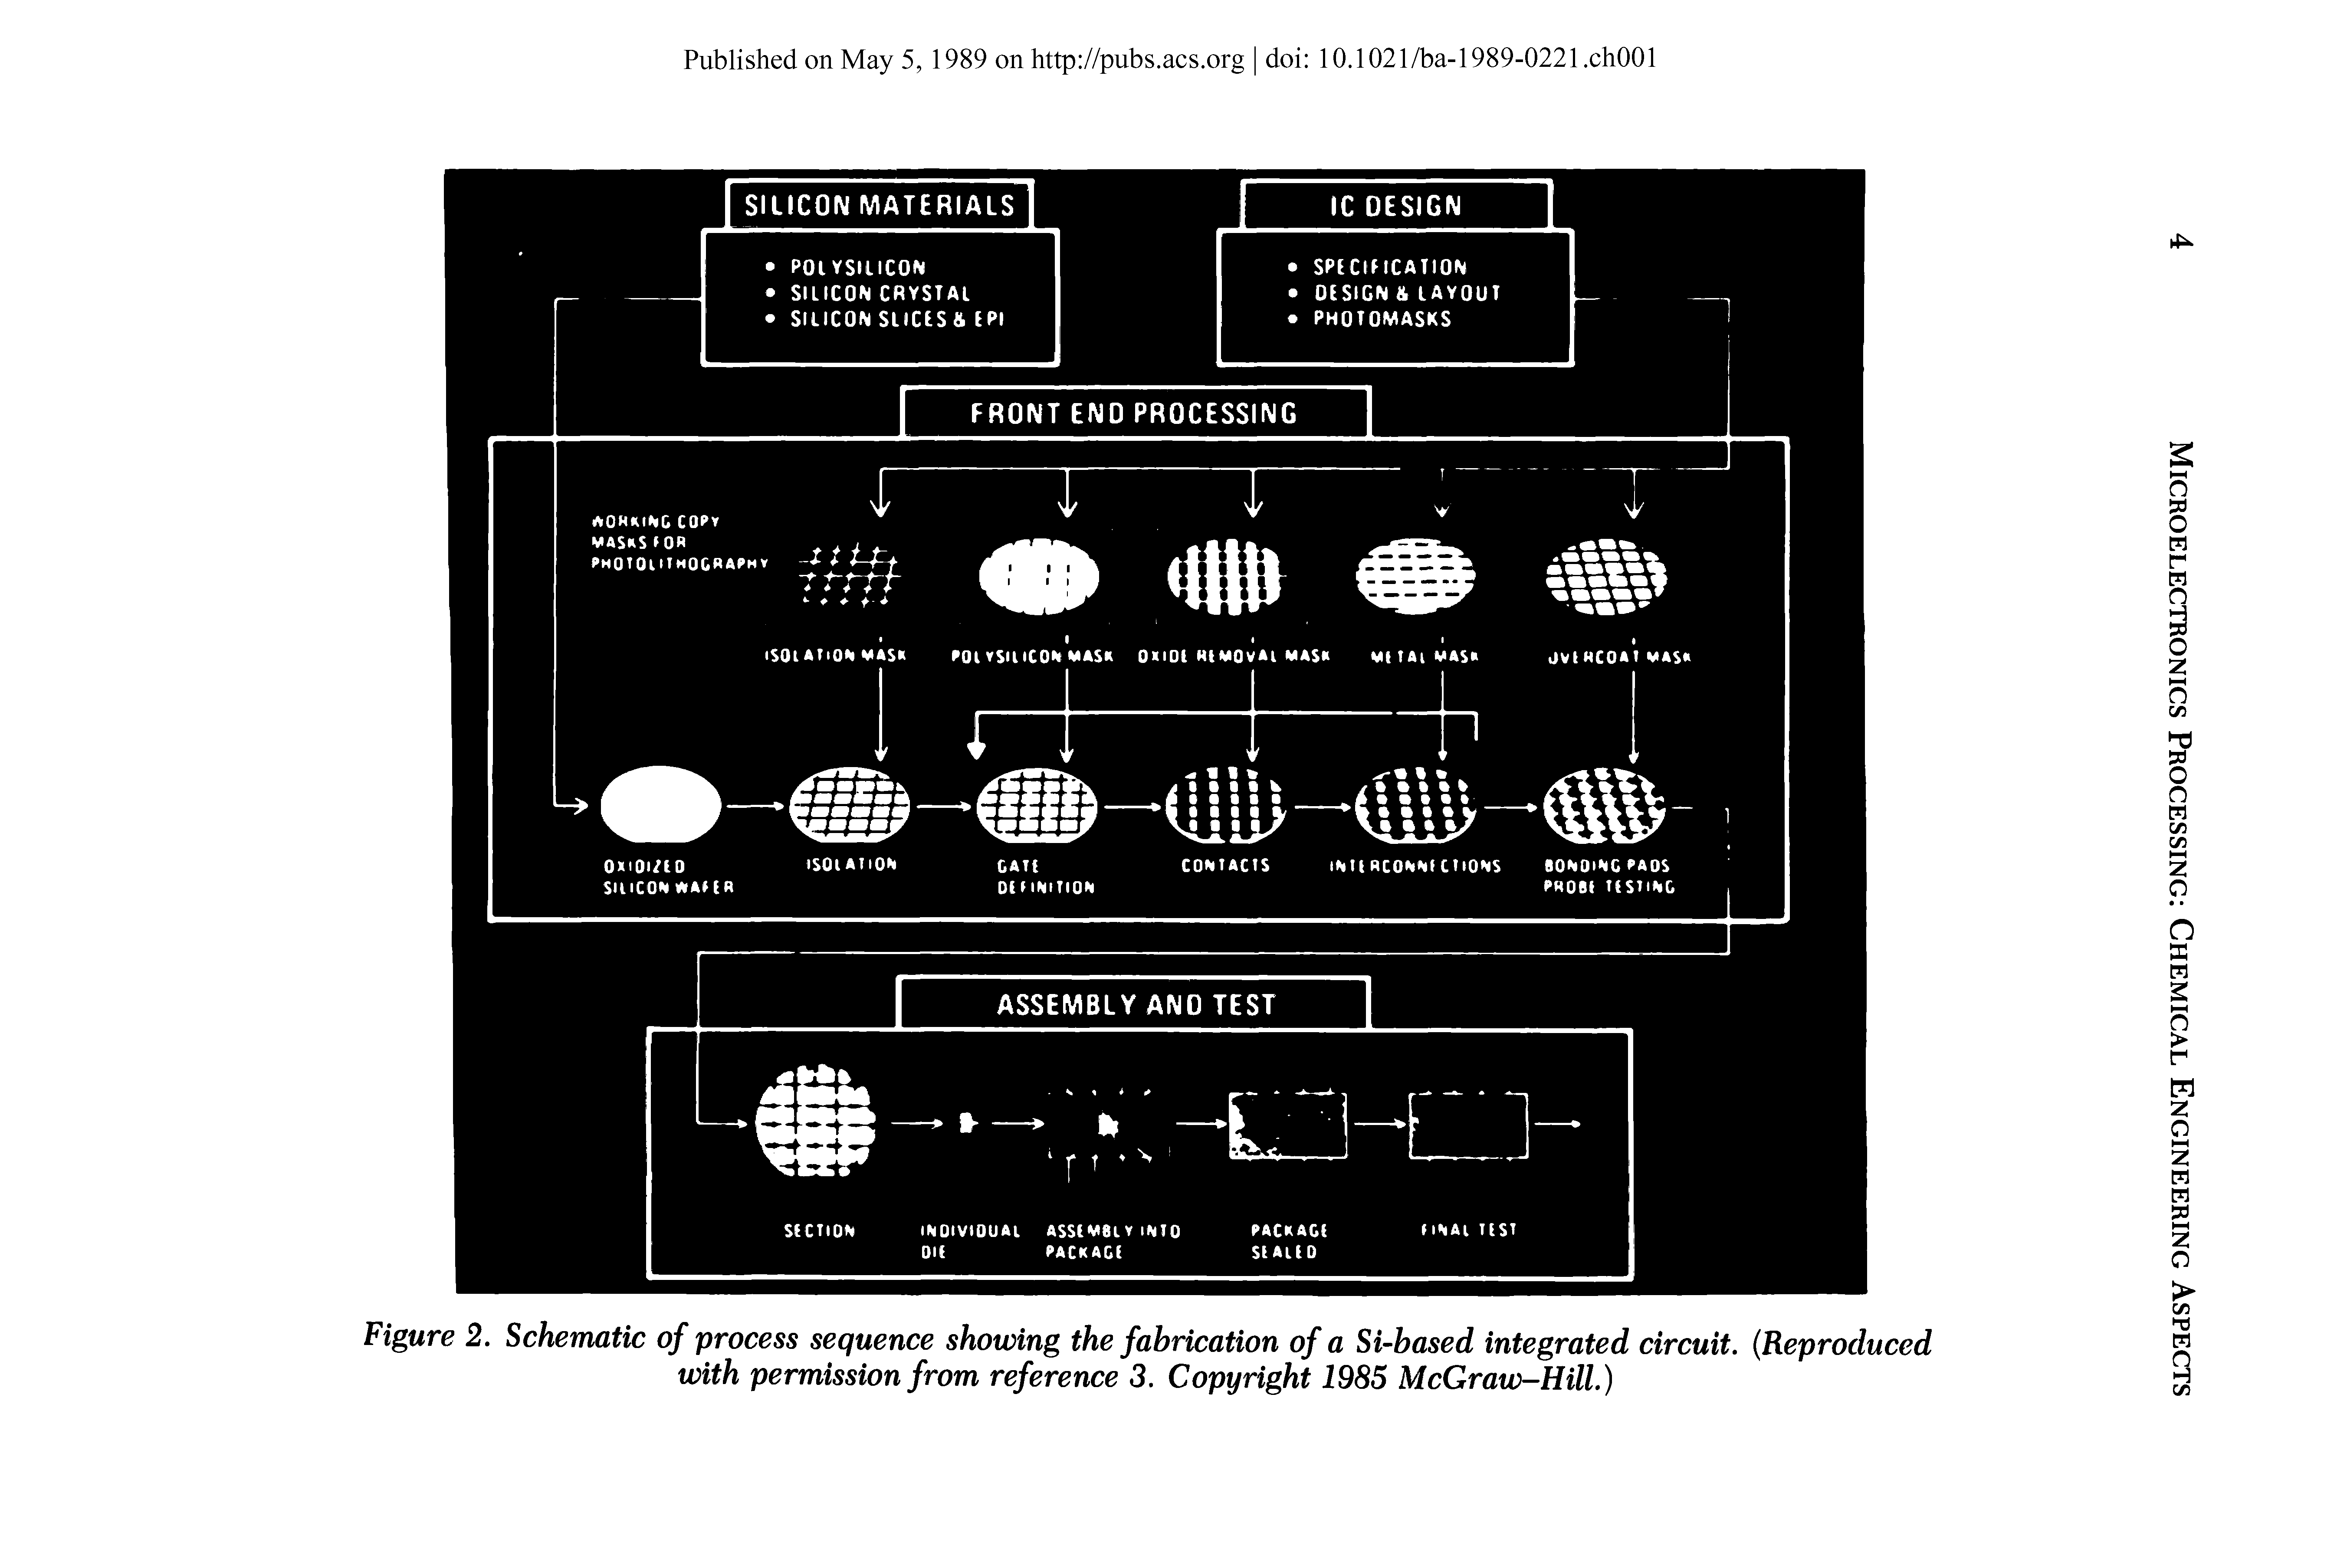 Figure 2. Schematic of process sequence showing the fabrication of a Si-based integrated circuit. (Reproduced with permission from reference 3. Copyright 1985 McGraw-Hill.)...